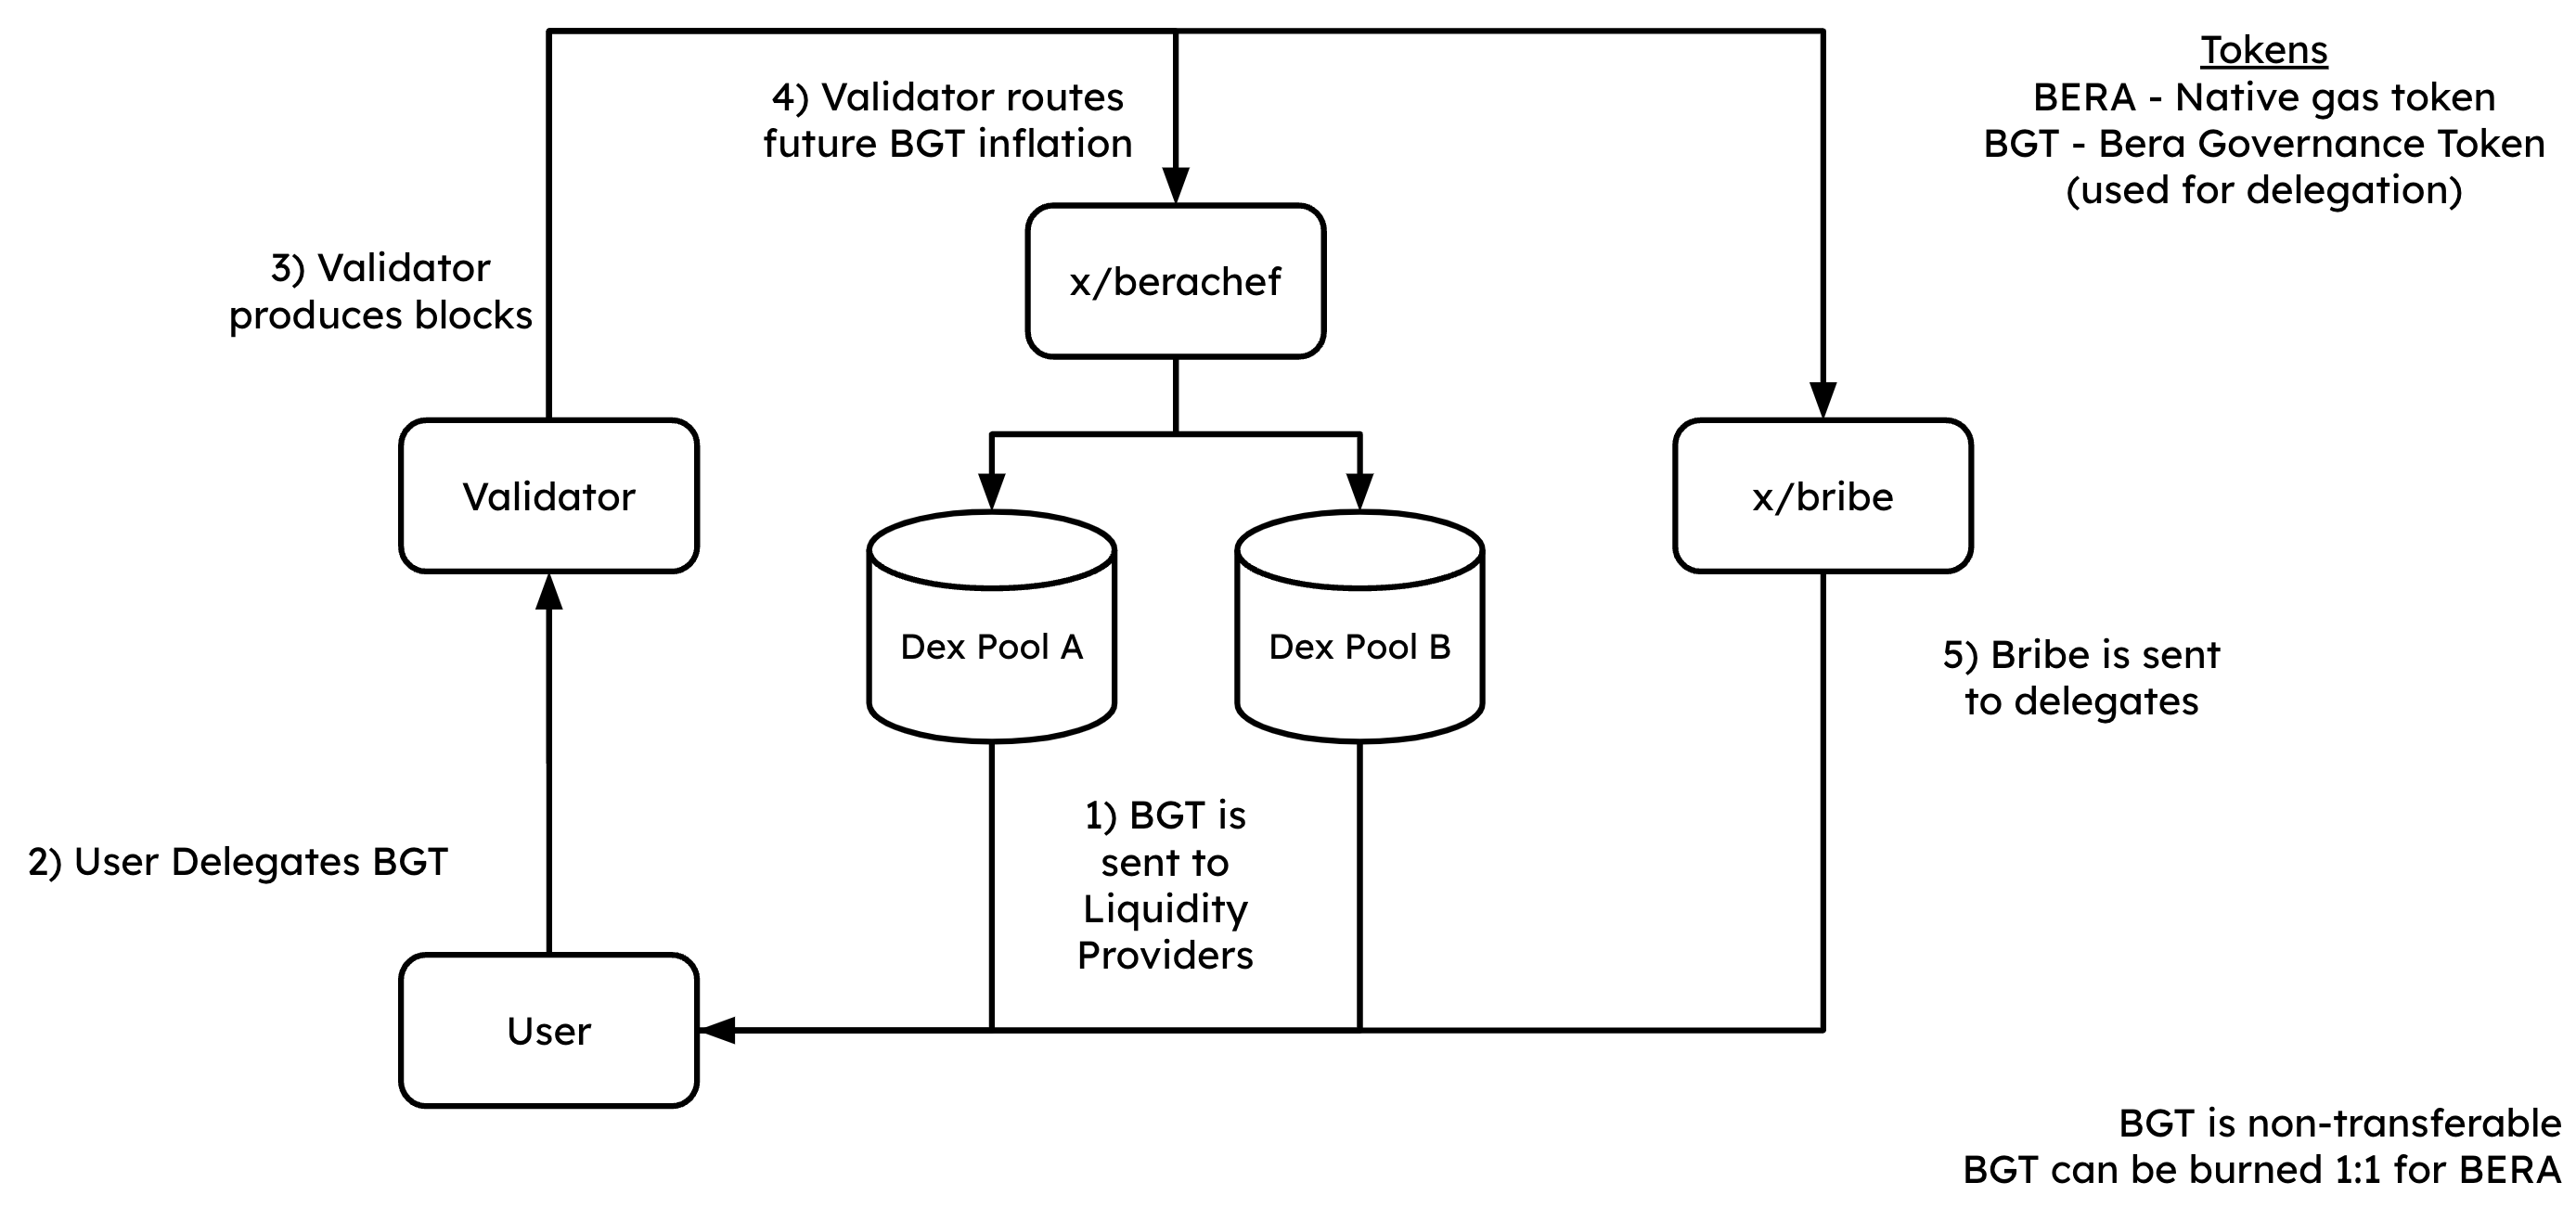 Berachain makes use of a robust and extremely adaptable consensus mechanism called Proof of Liquidity (PoL). This diagram shows how PoL fashions a reciprocal relationship within the greater Berachain ecosystem and its interconnected economic, governance, validator, and DeFi structure. (Image Credit: What is Proof of Liquidity via Berachain Documentation)